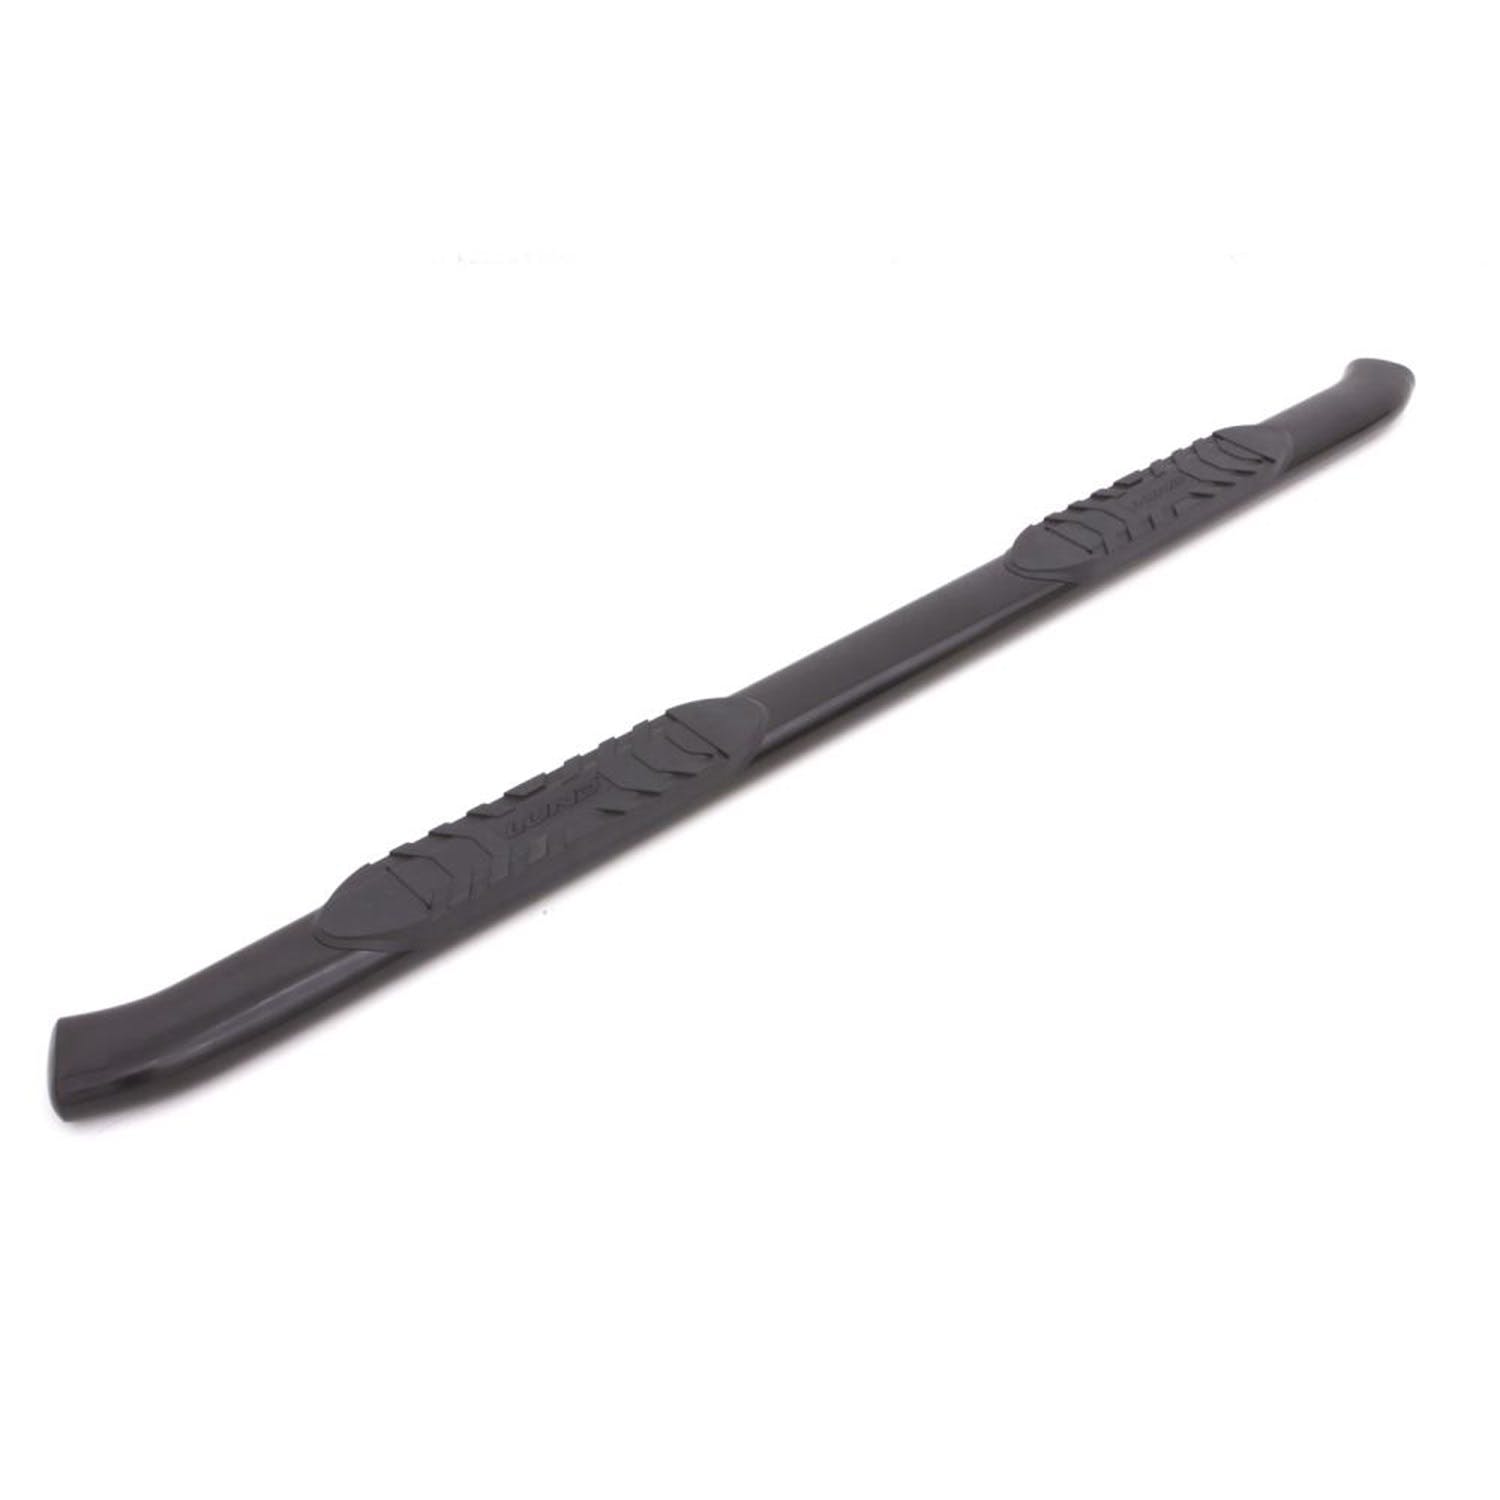 LUND 23461909 4 Inch Oval Curved Nerf Bar - Black 4 In OVAL CURVED STEEL